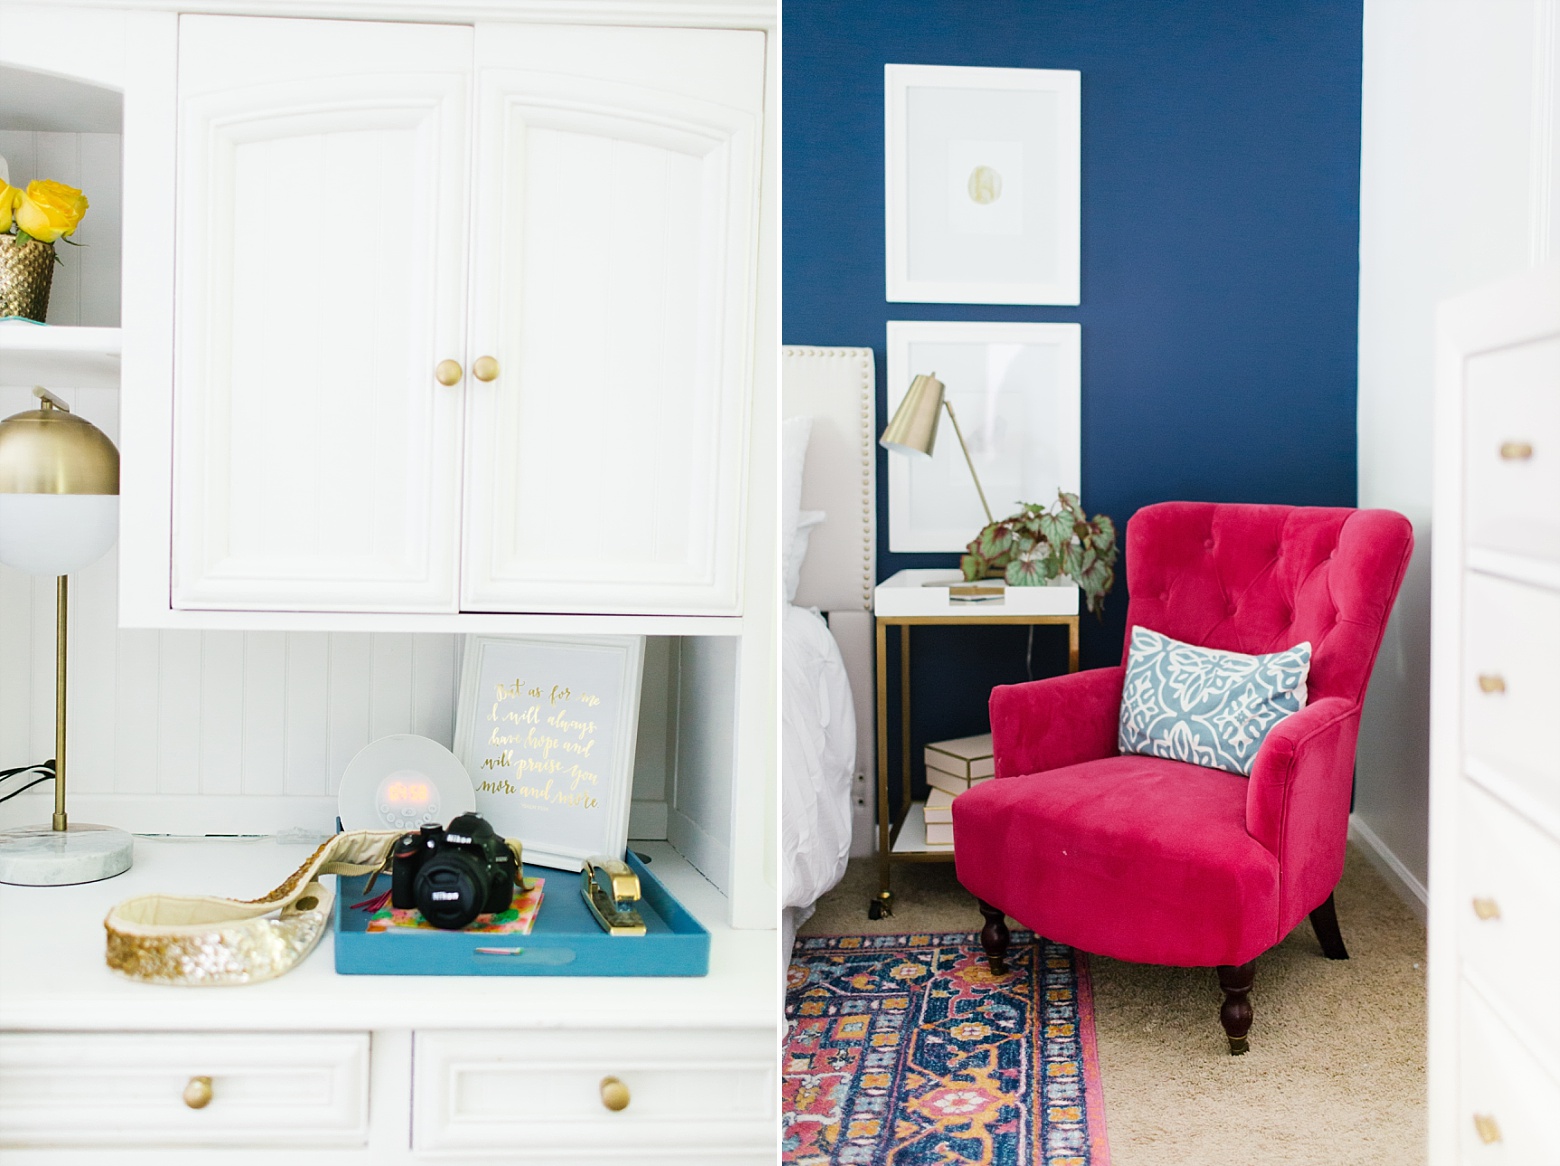 designer tips to decorating with color and pattern in your home on Megan Martin Creative